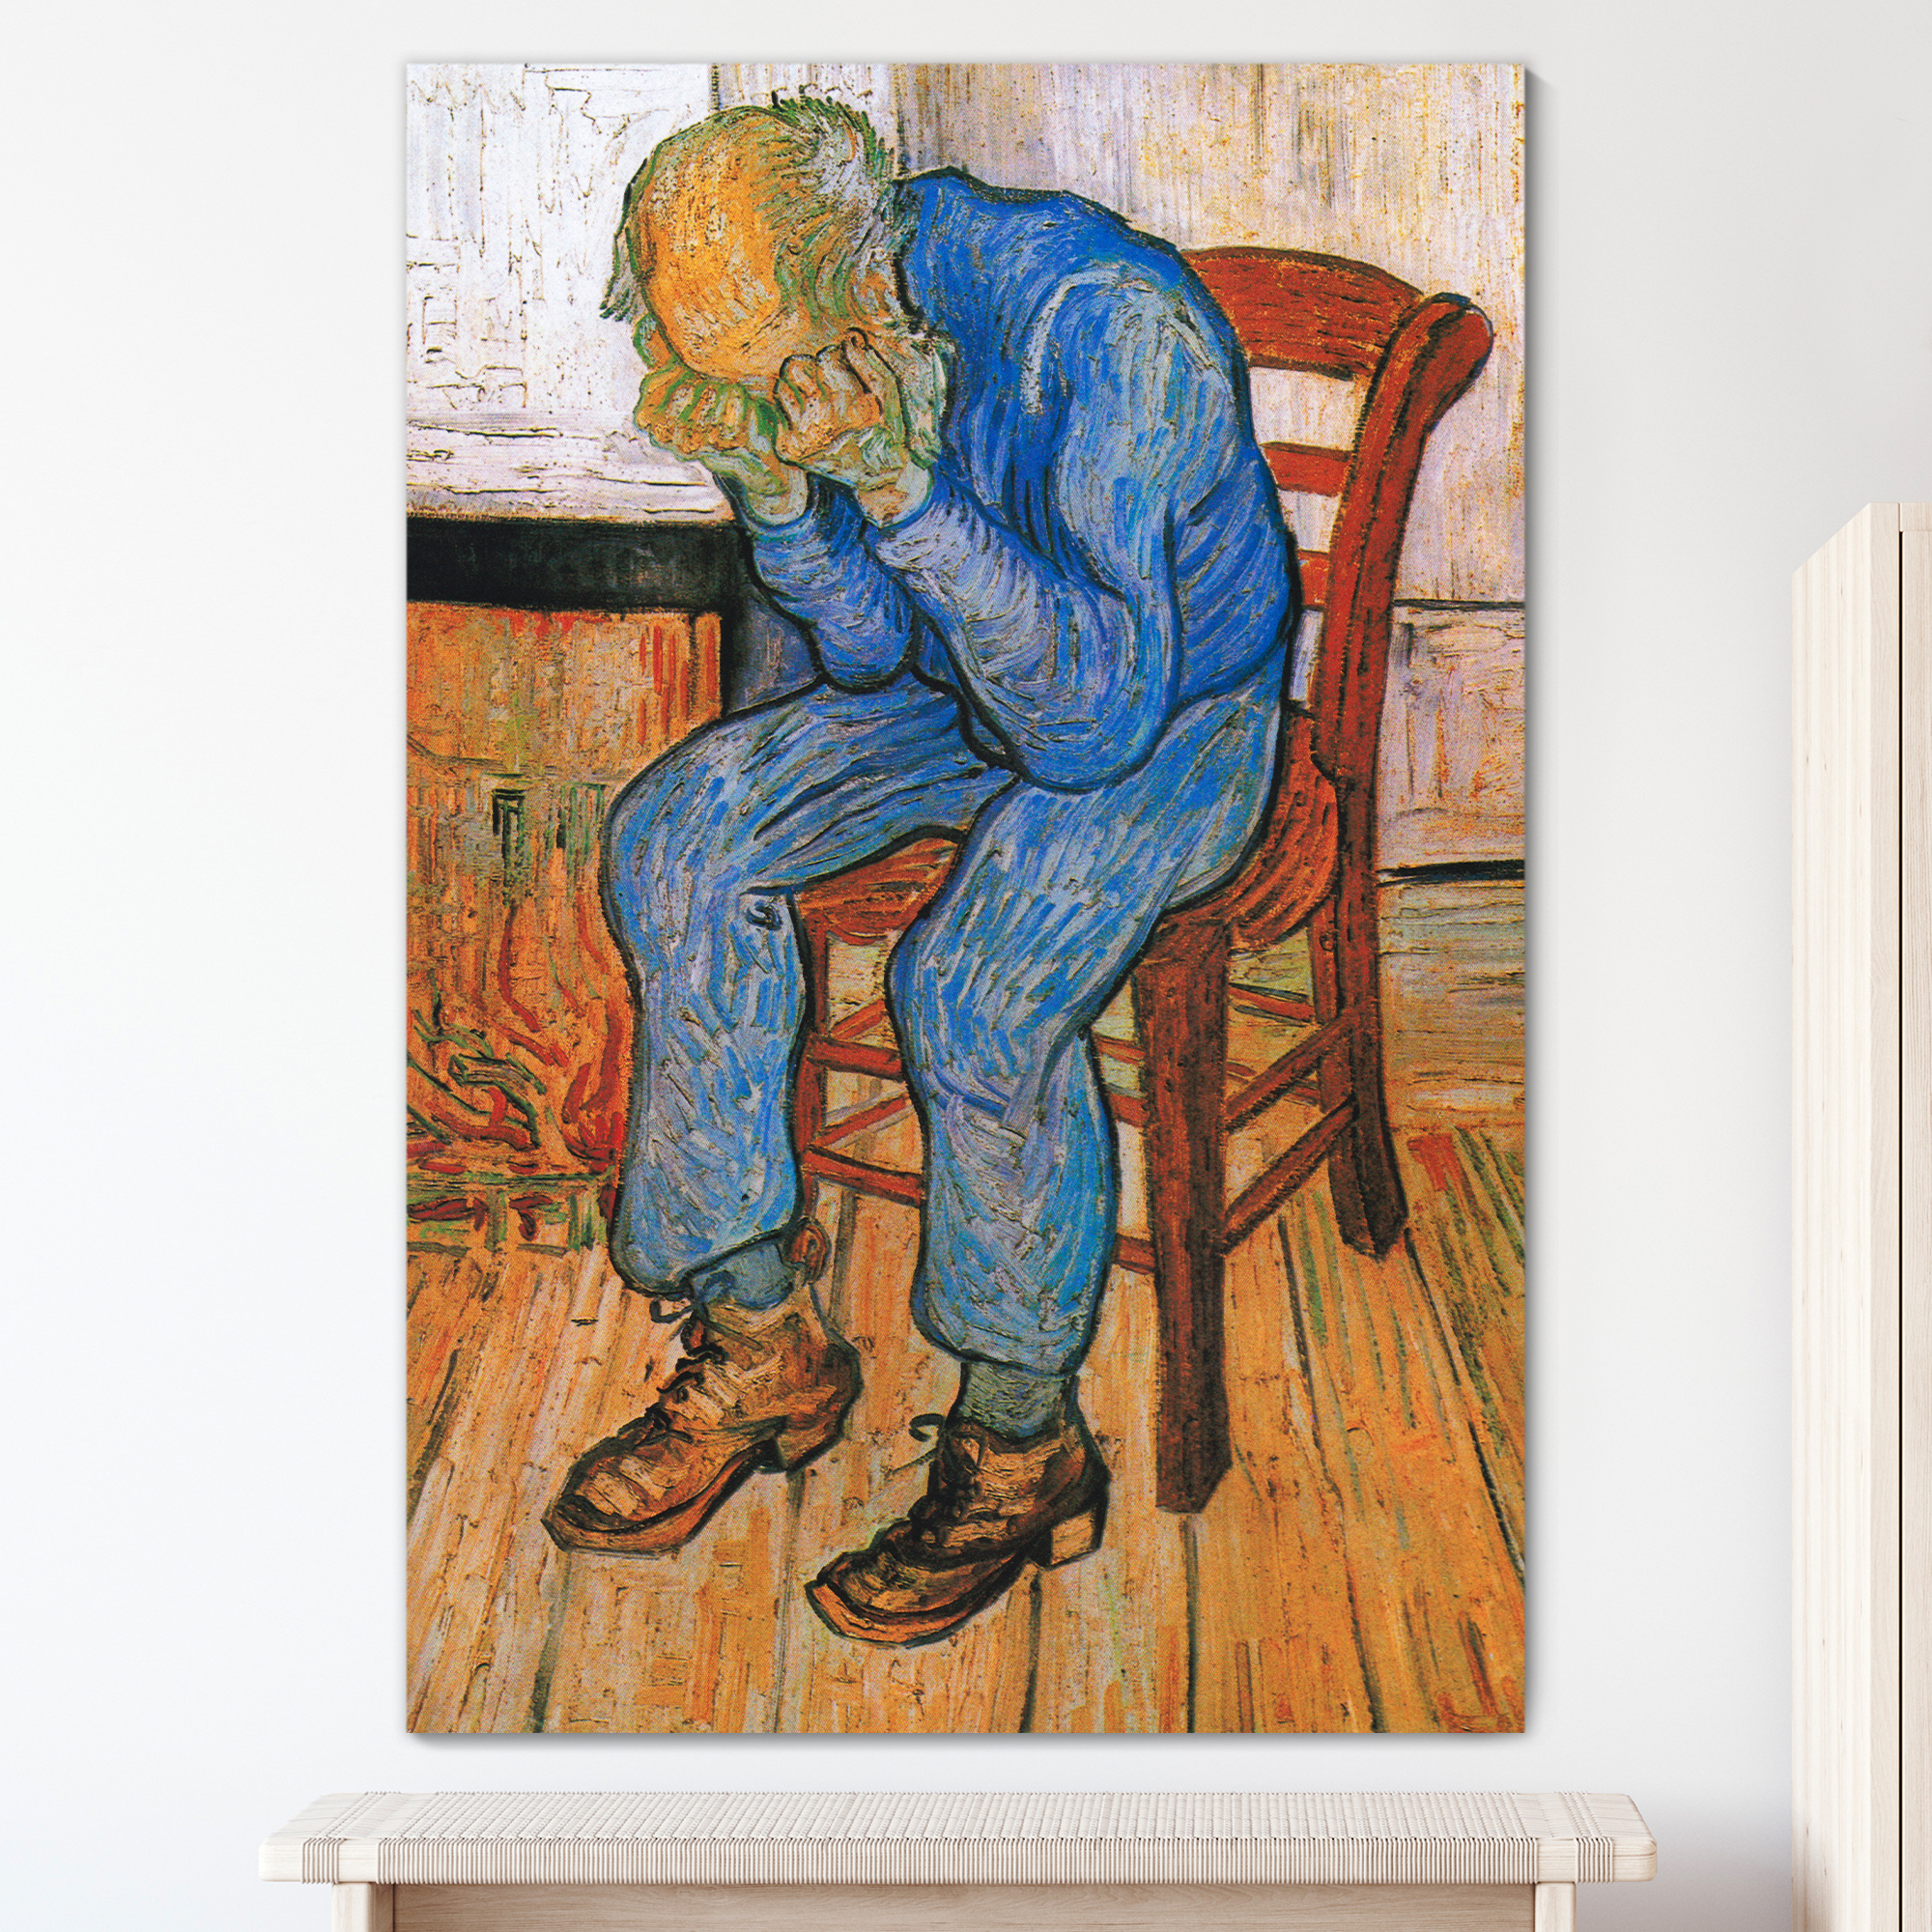 At Eternity's Gate (Sorrowing Old Man) Vincent Van Gogh - Oil Painting Reproduction on Canvas Prints Wall Art, Ready to Hang - 12x18 inches